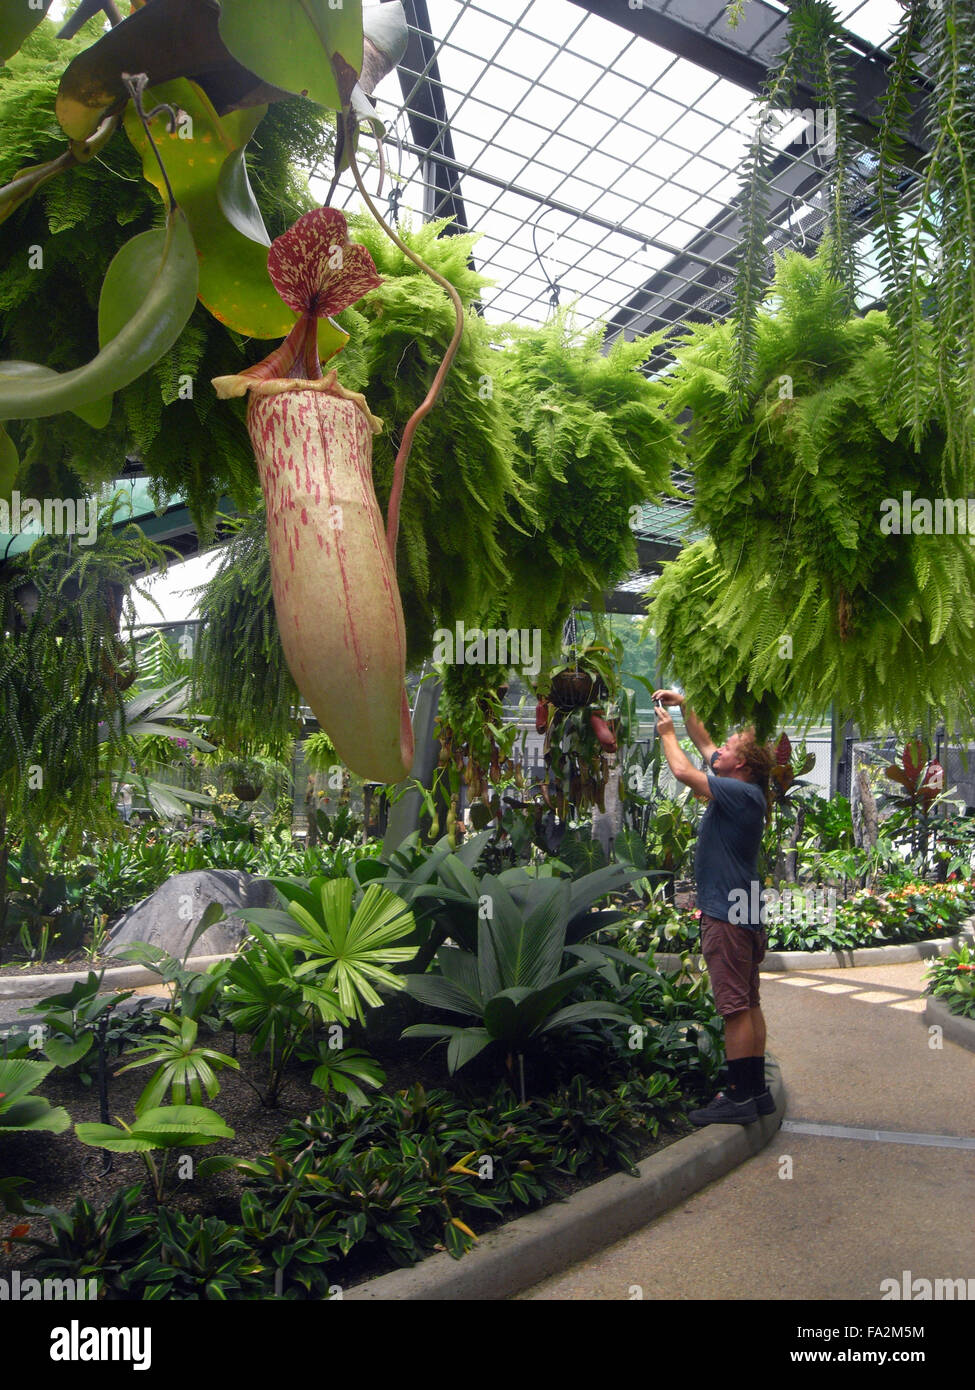 Pitcher plants (Nepenthes sp.), ferns and other lush greenery in the new Cairns Conservatory, Flecker Botanic Gardens, Cairns, Q Stock Photo